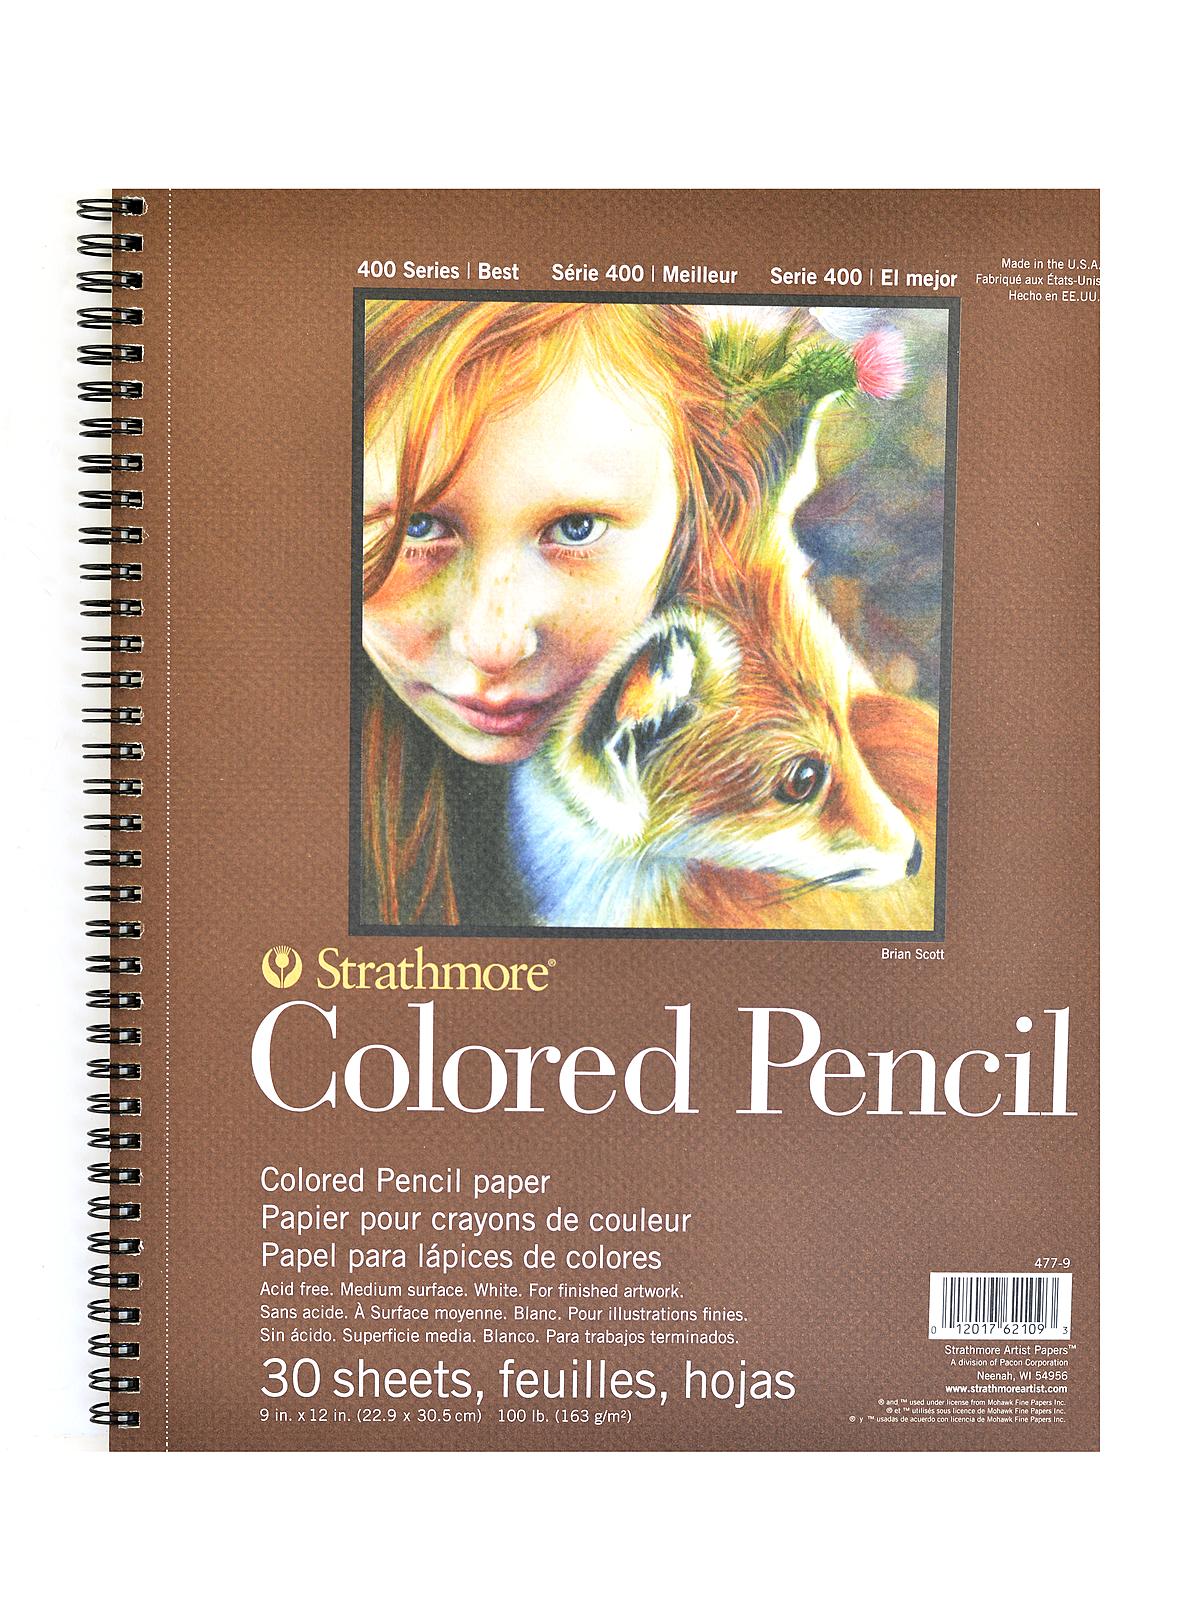 400 Series Colored Pencil Pad 9 In. X 12 In. 30 Sheets